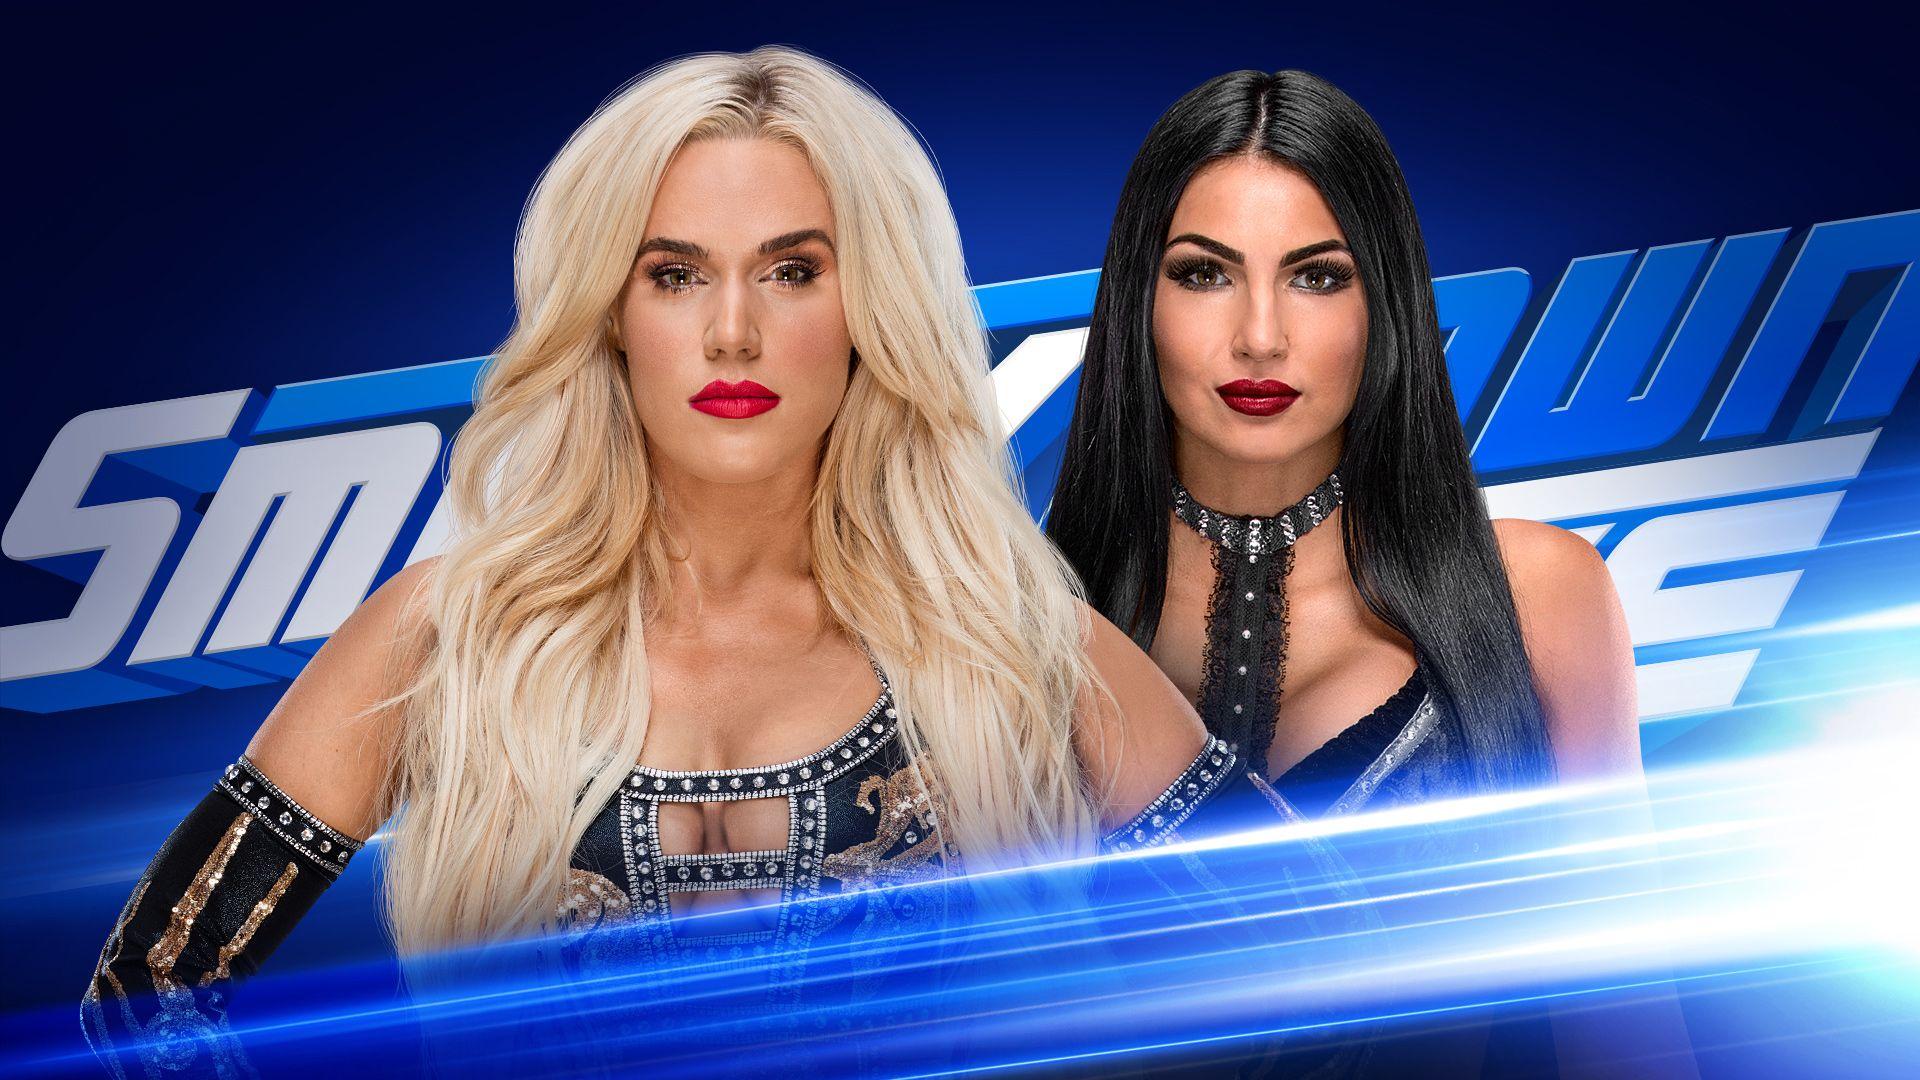 Lana and Billie Kay to clash in Women's Money in the Bank Qualifying